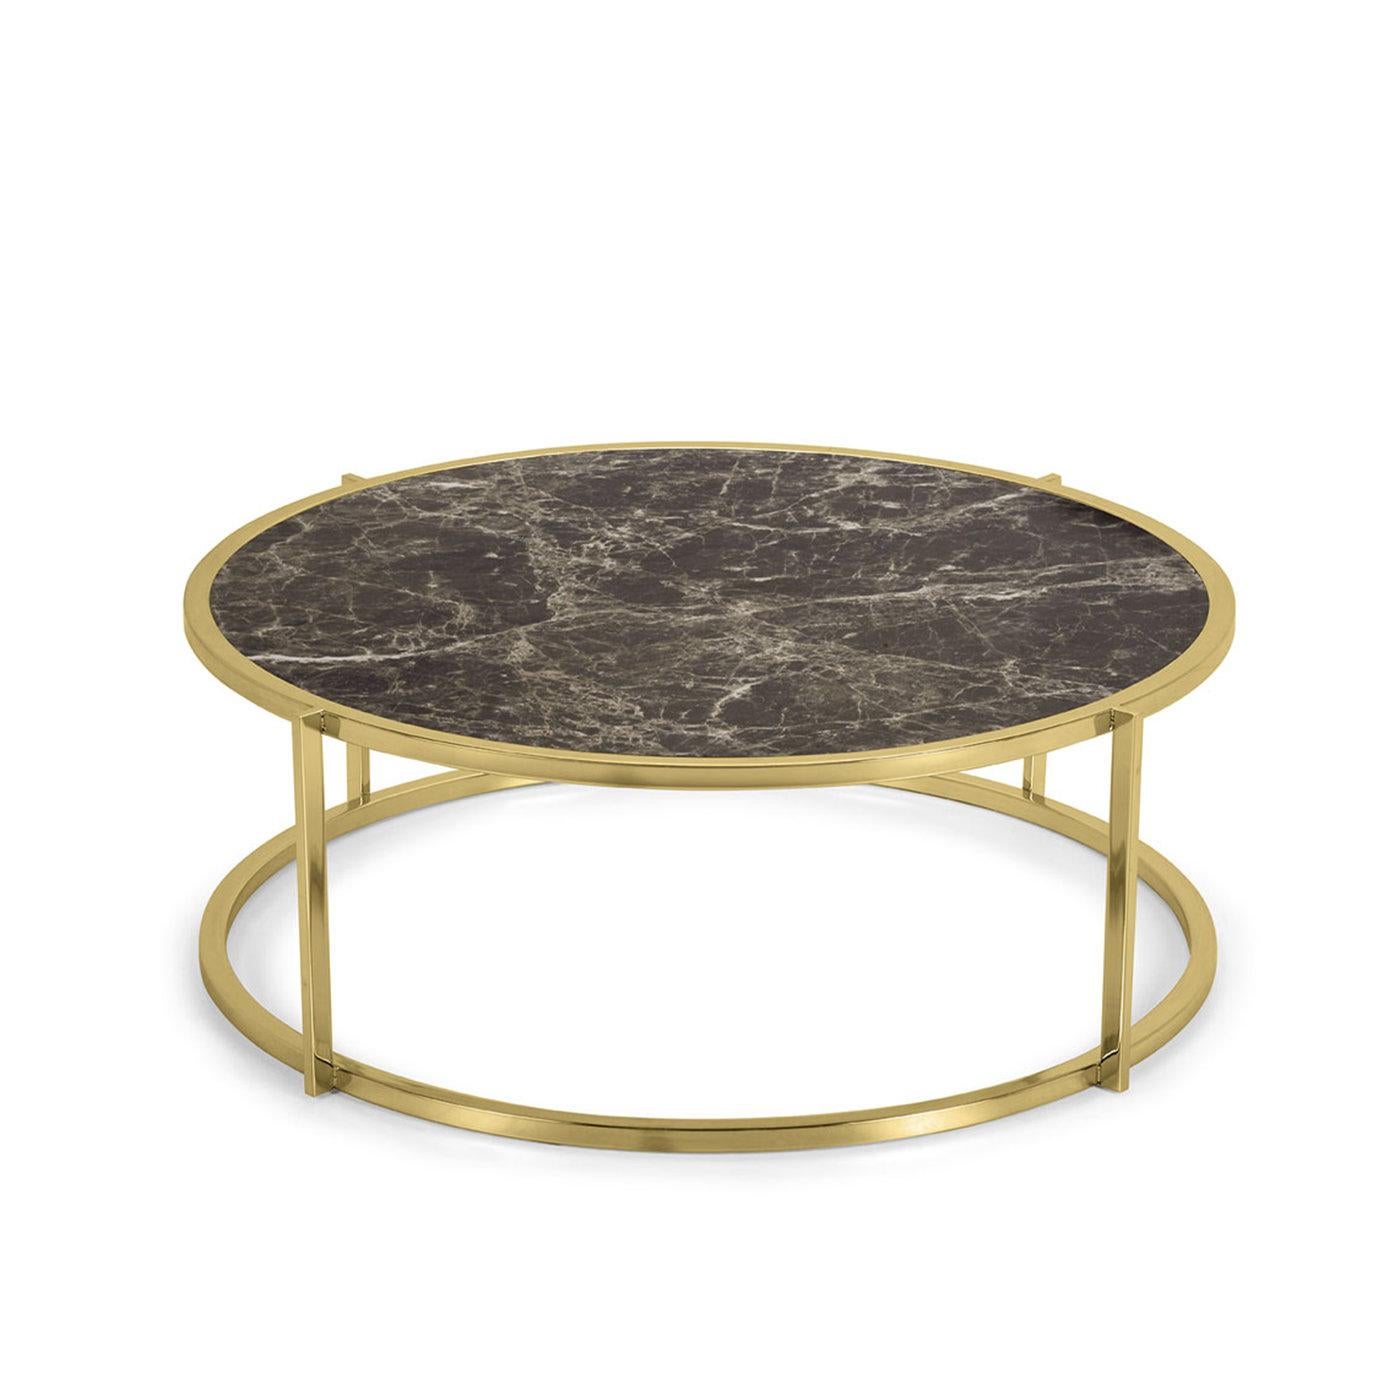 Brimming with luxe appeal, this round coffee table boasts an airy silhouette inspired by Thetis, the most beautiful of the Nereids nymphs and goddess of the seas and metamorphoses. The stain-resistant, circular ceramic top in Emperador marble effect